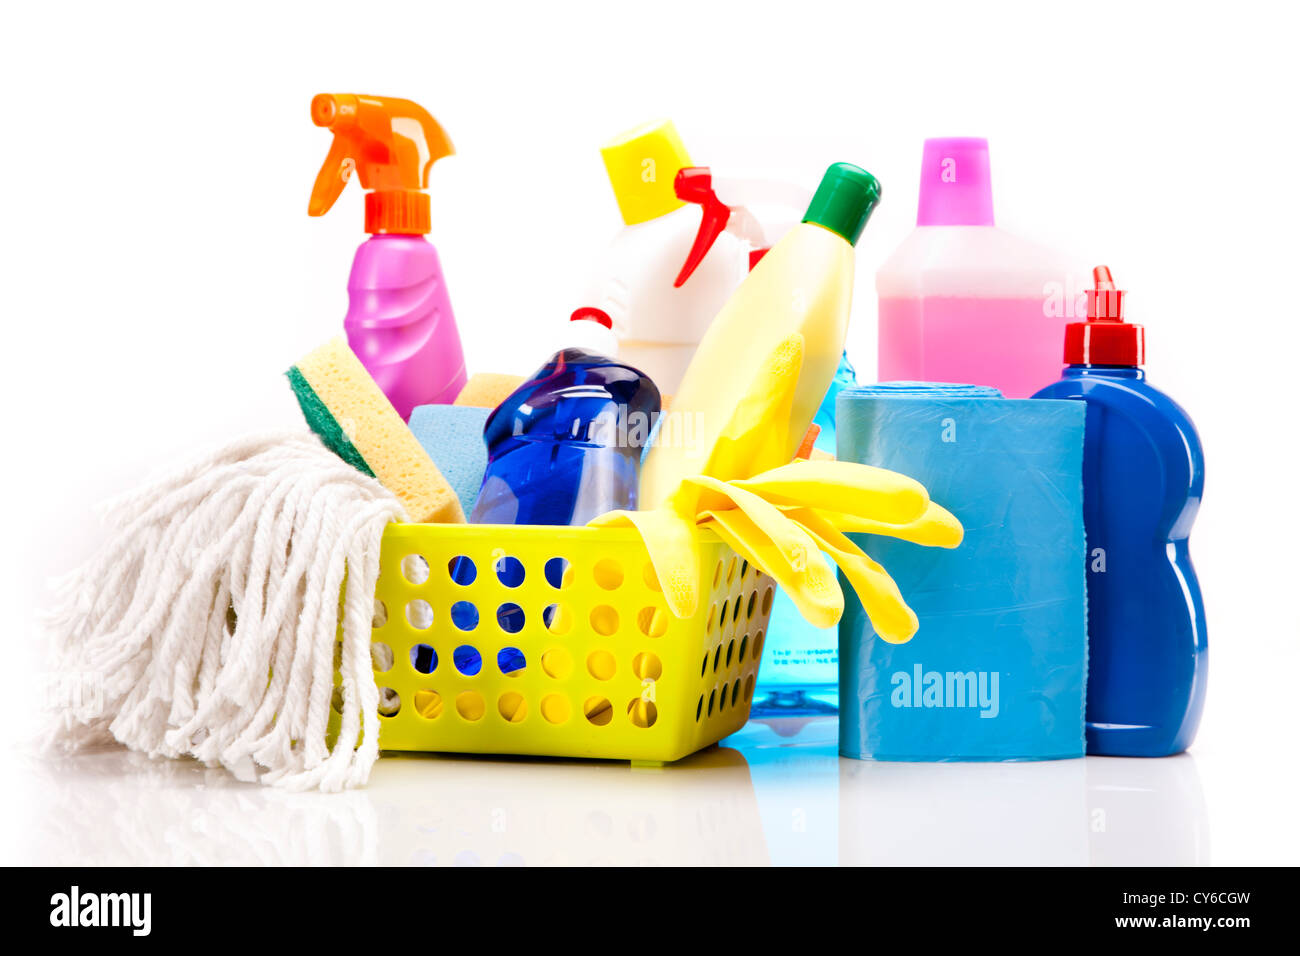 https://c8.alamy.com/comp/CY6CGW/cleaning-items-isolated-on-white-background-CY6CGW.jpg